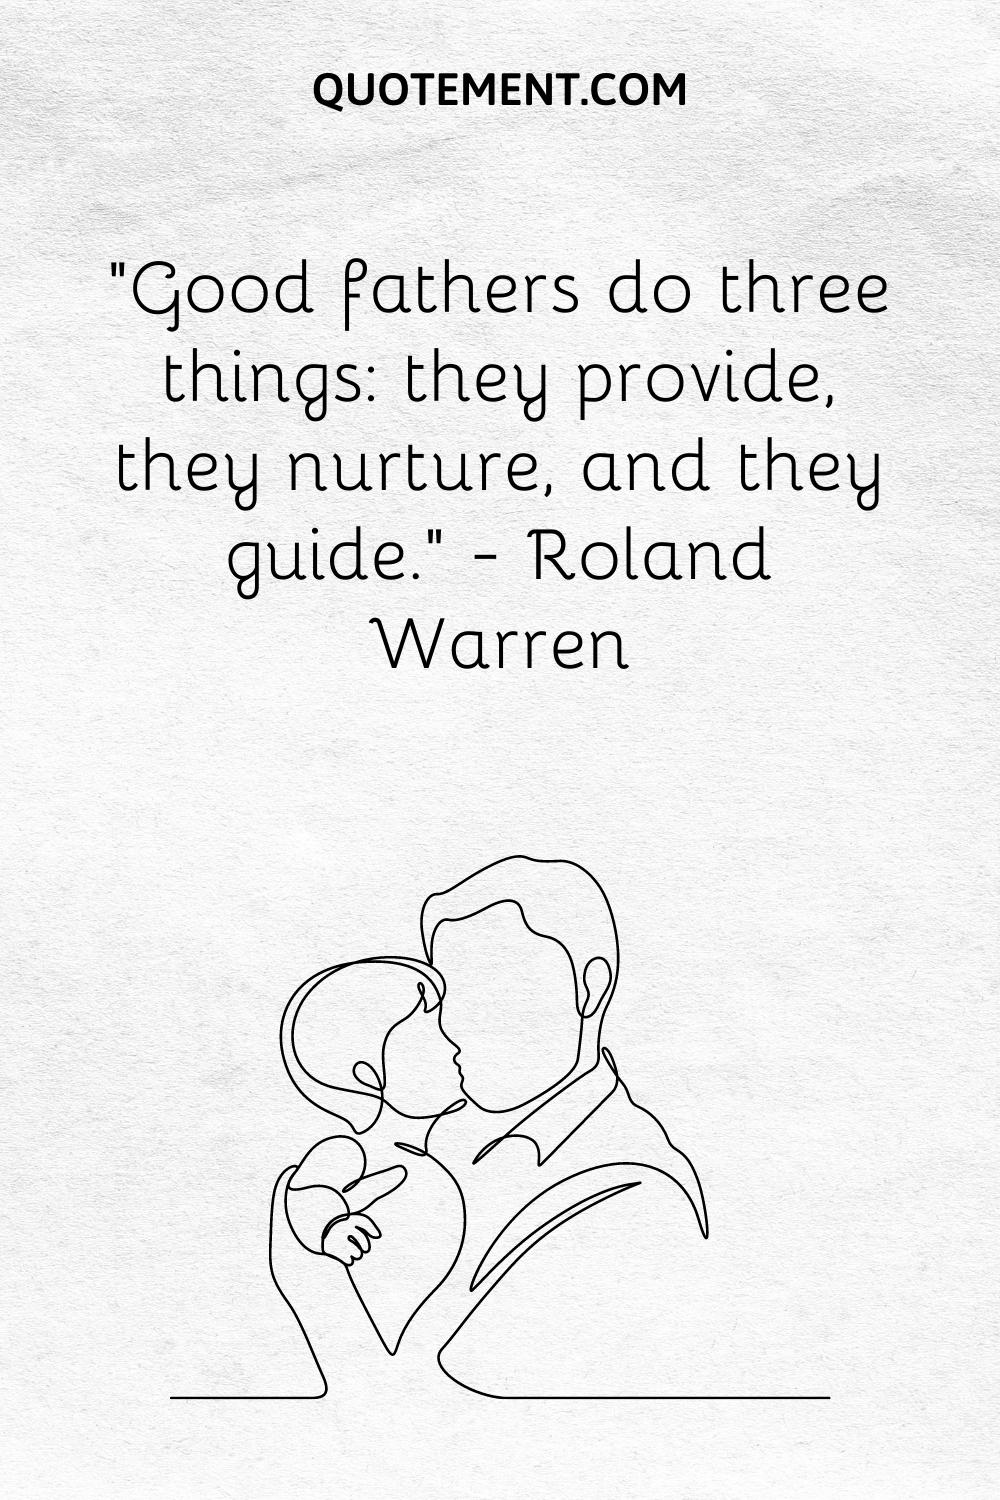 “Good fathers do three things they provide, they nurture, and they guide.” — Roland Warren
